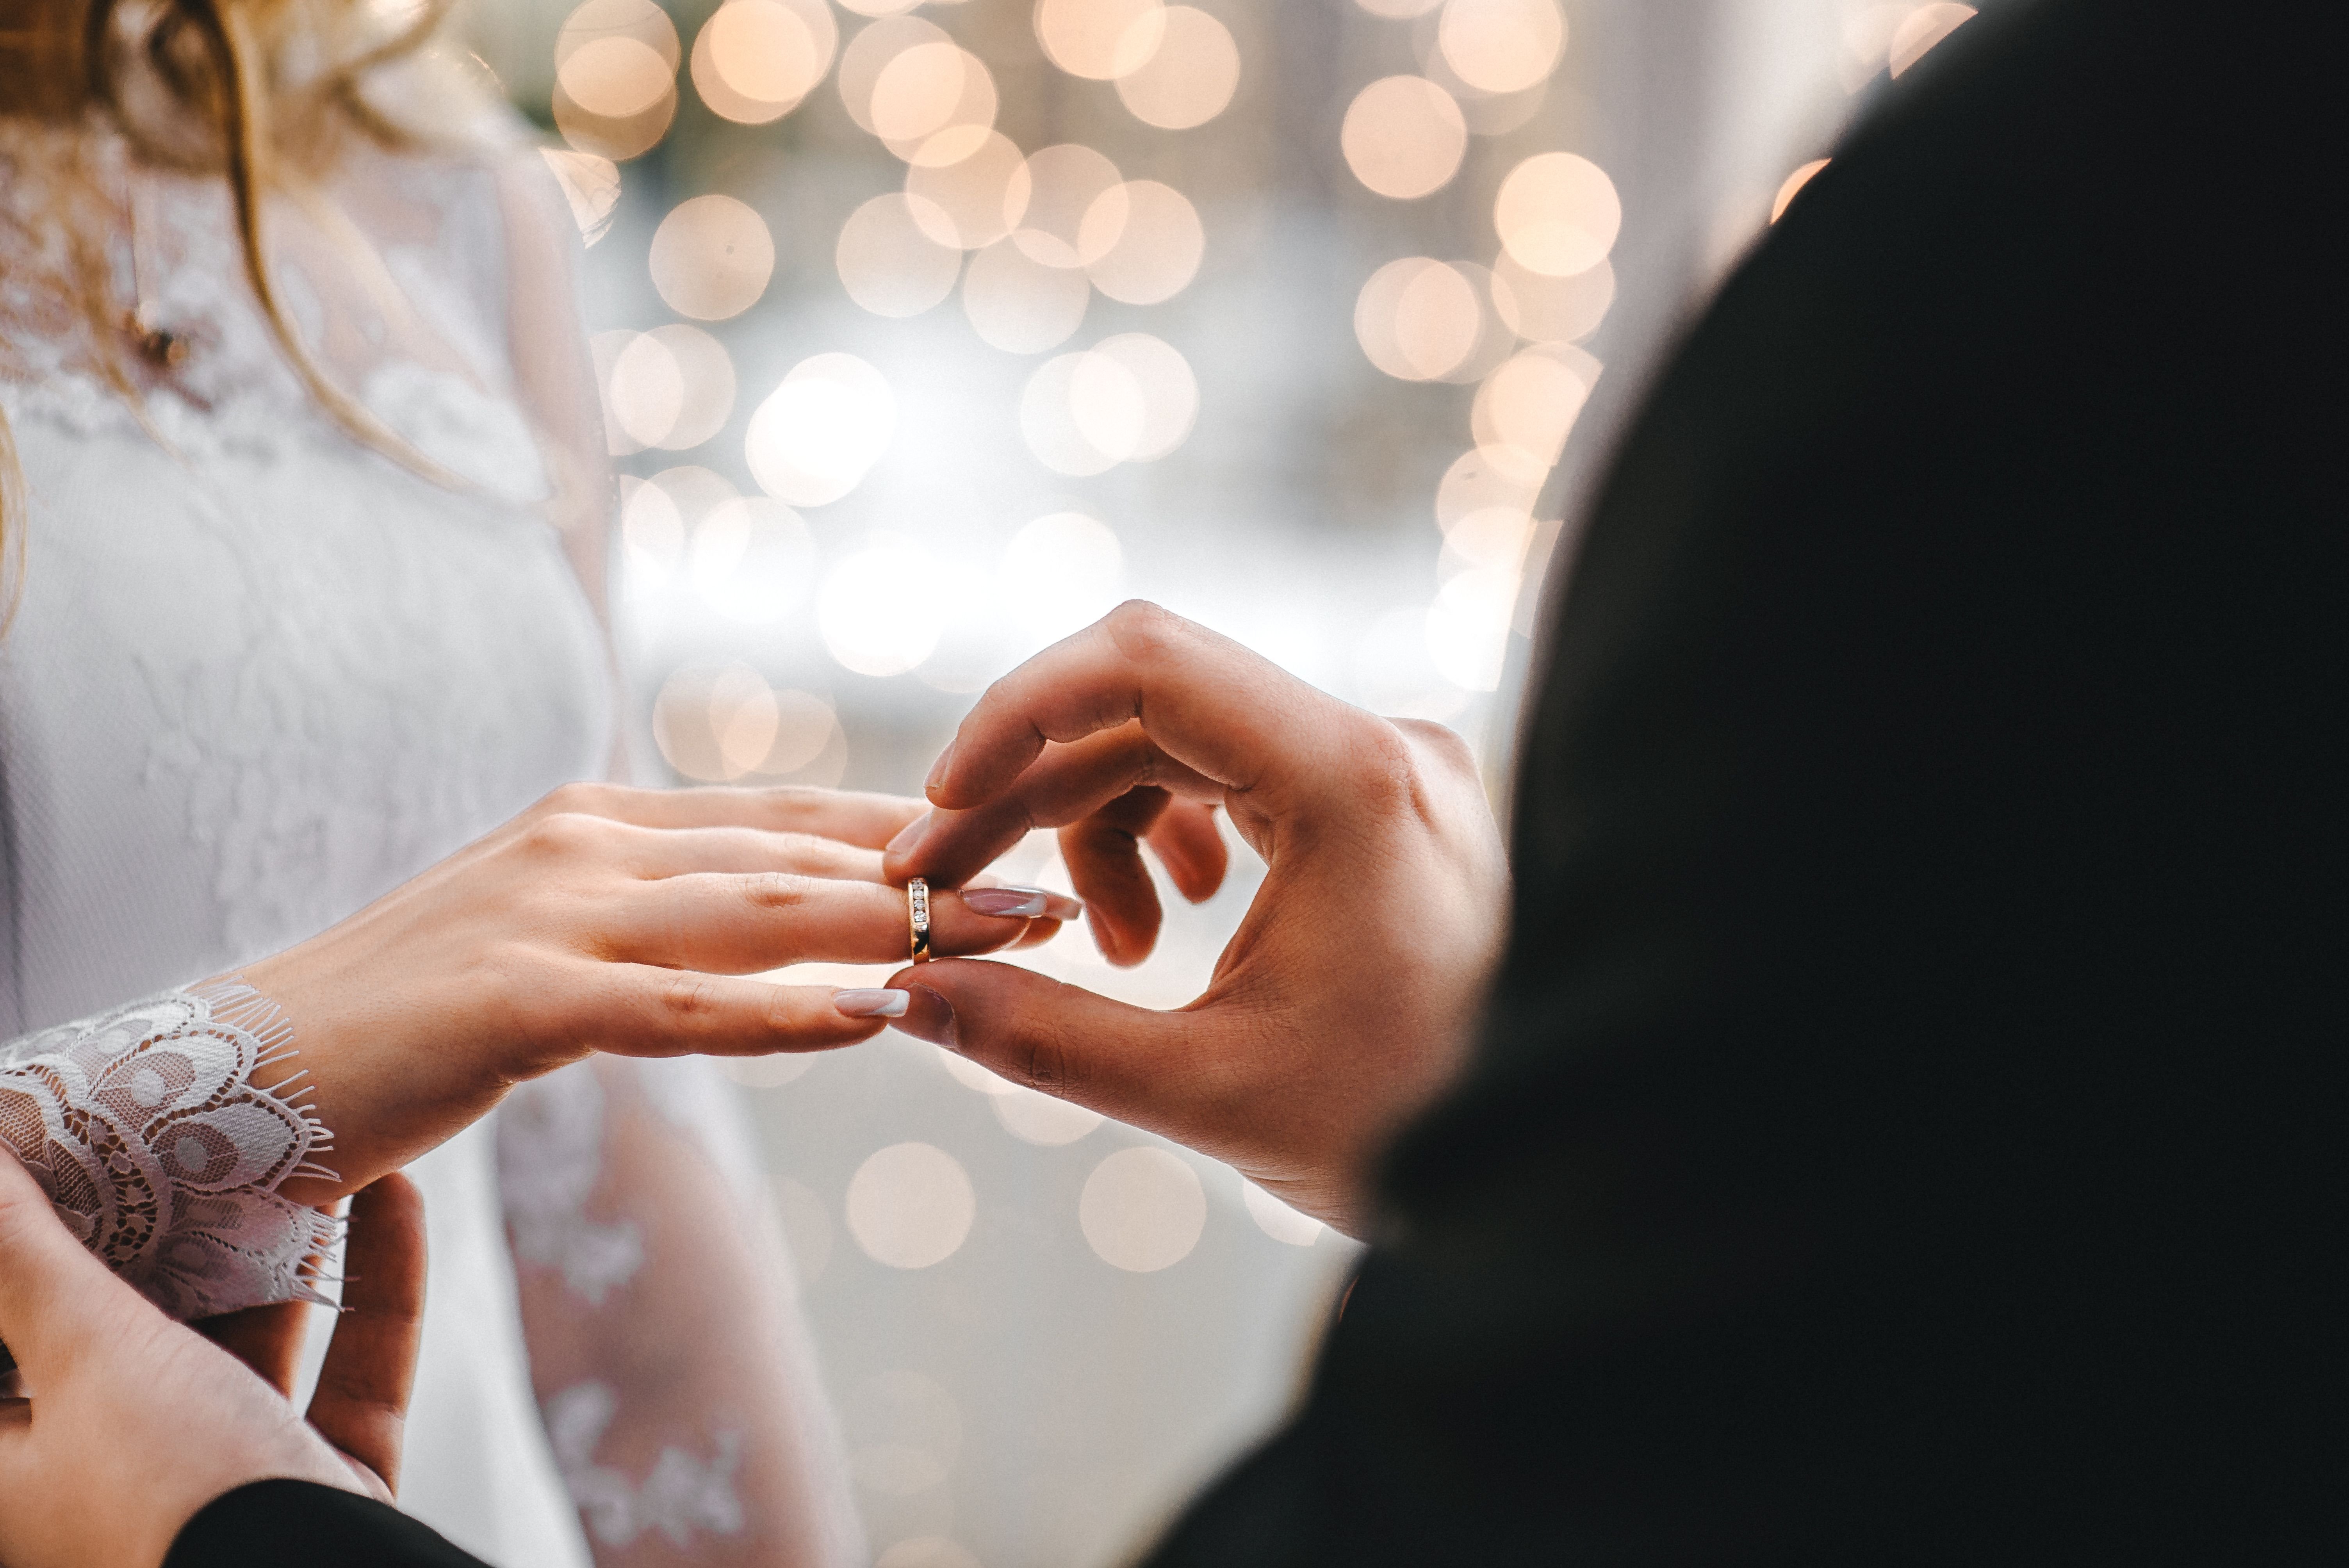 A groom putting a wedding ring on his bride's finger | Photo: Shutterstock